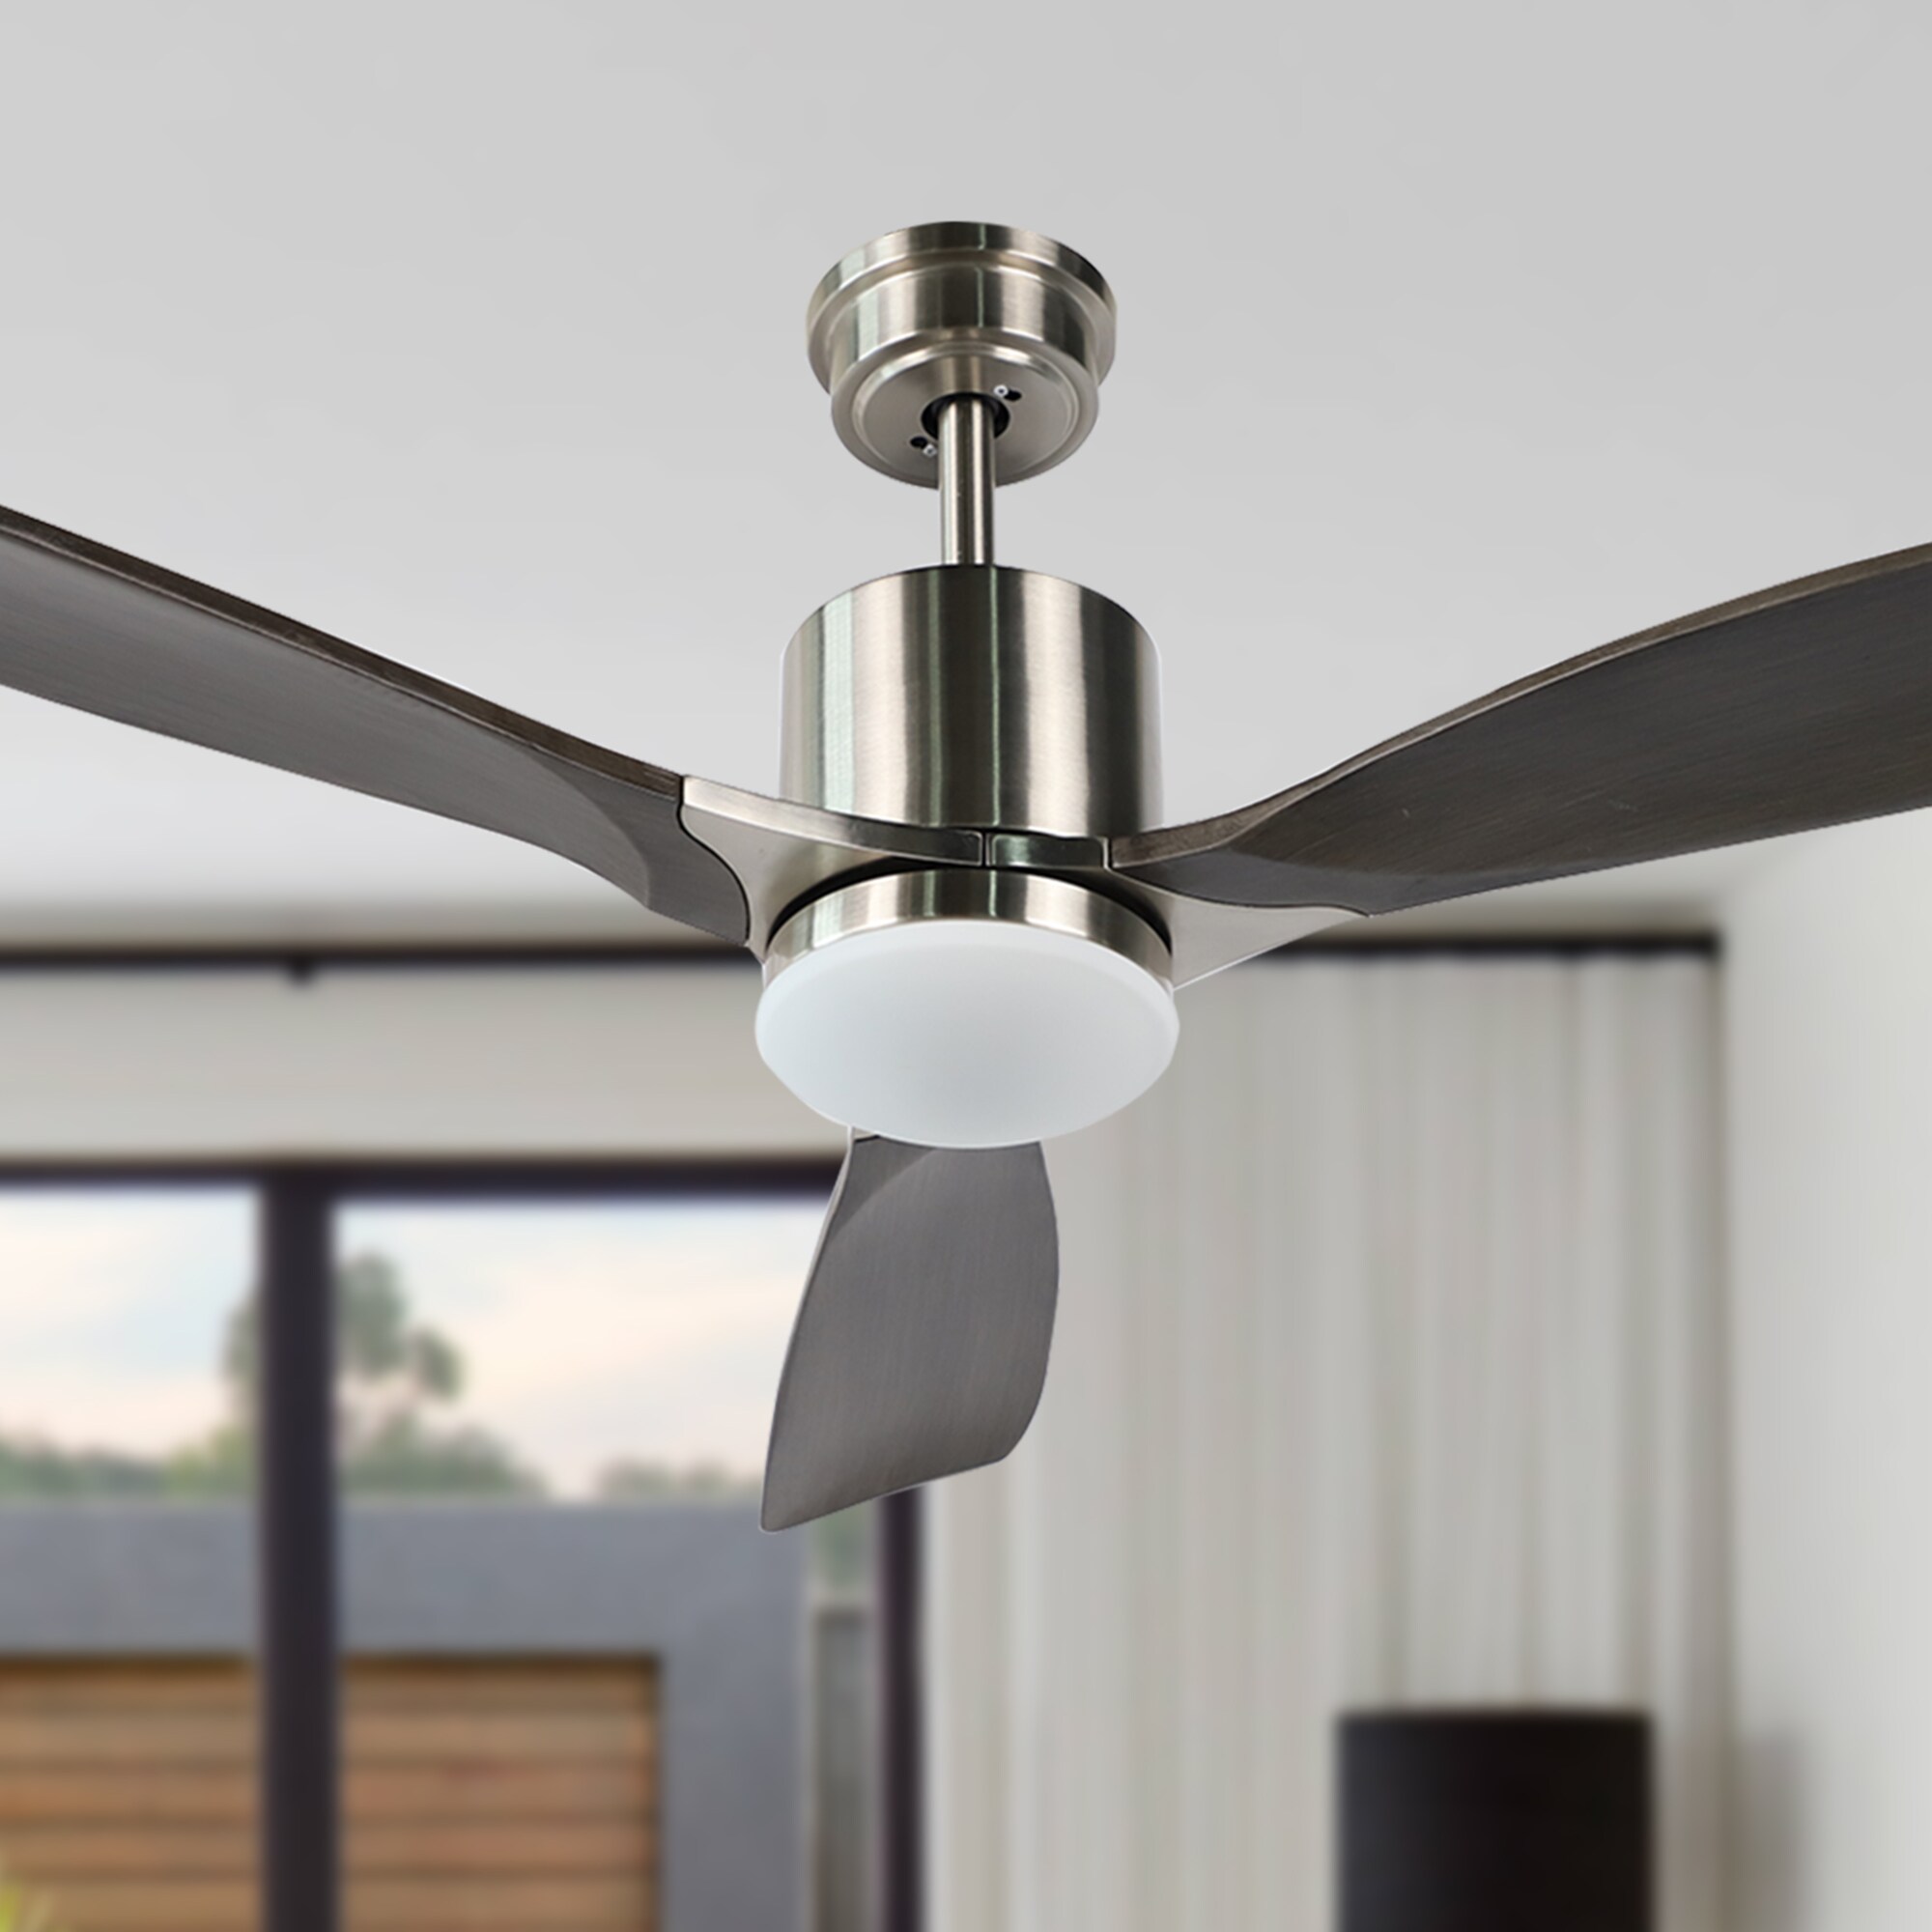 ExBrite LED Lighting & Ceiling Fans at Lowes.com